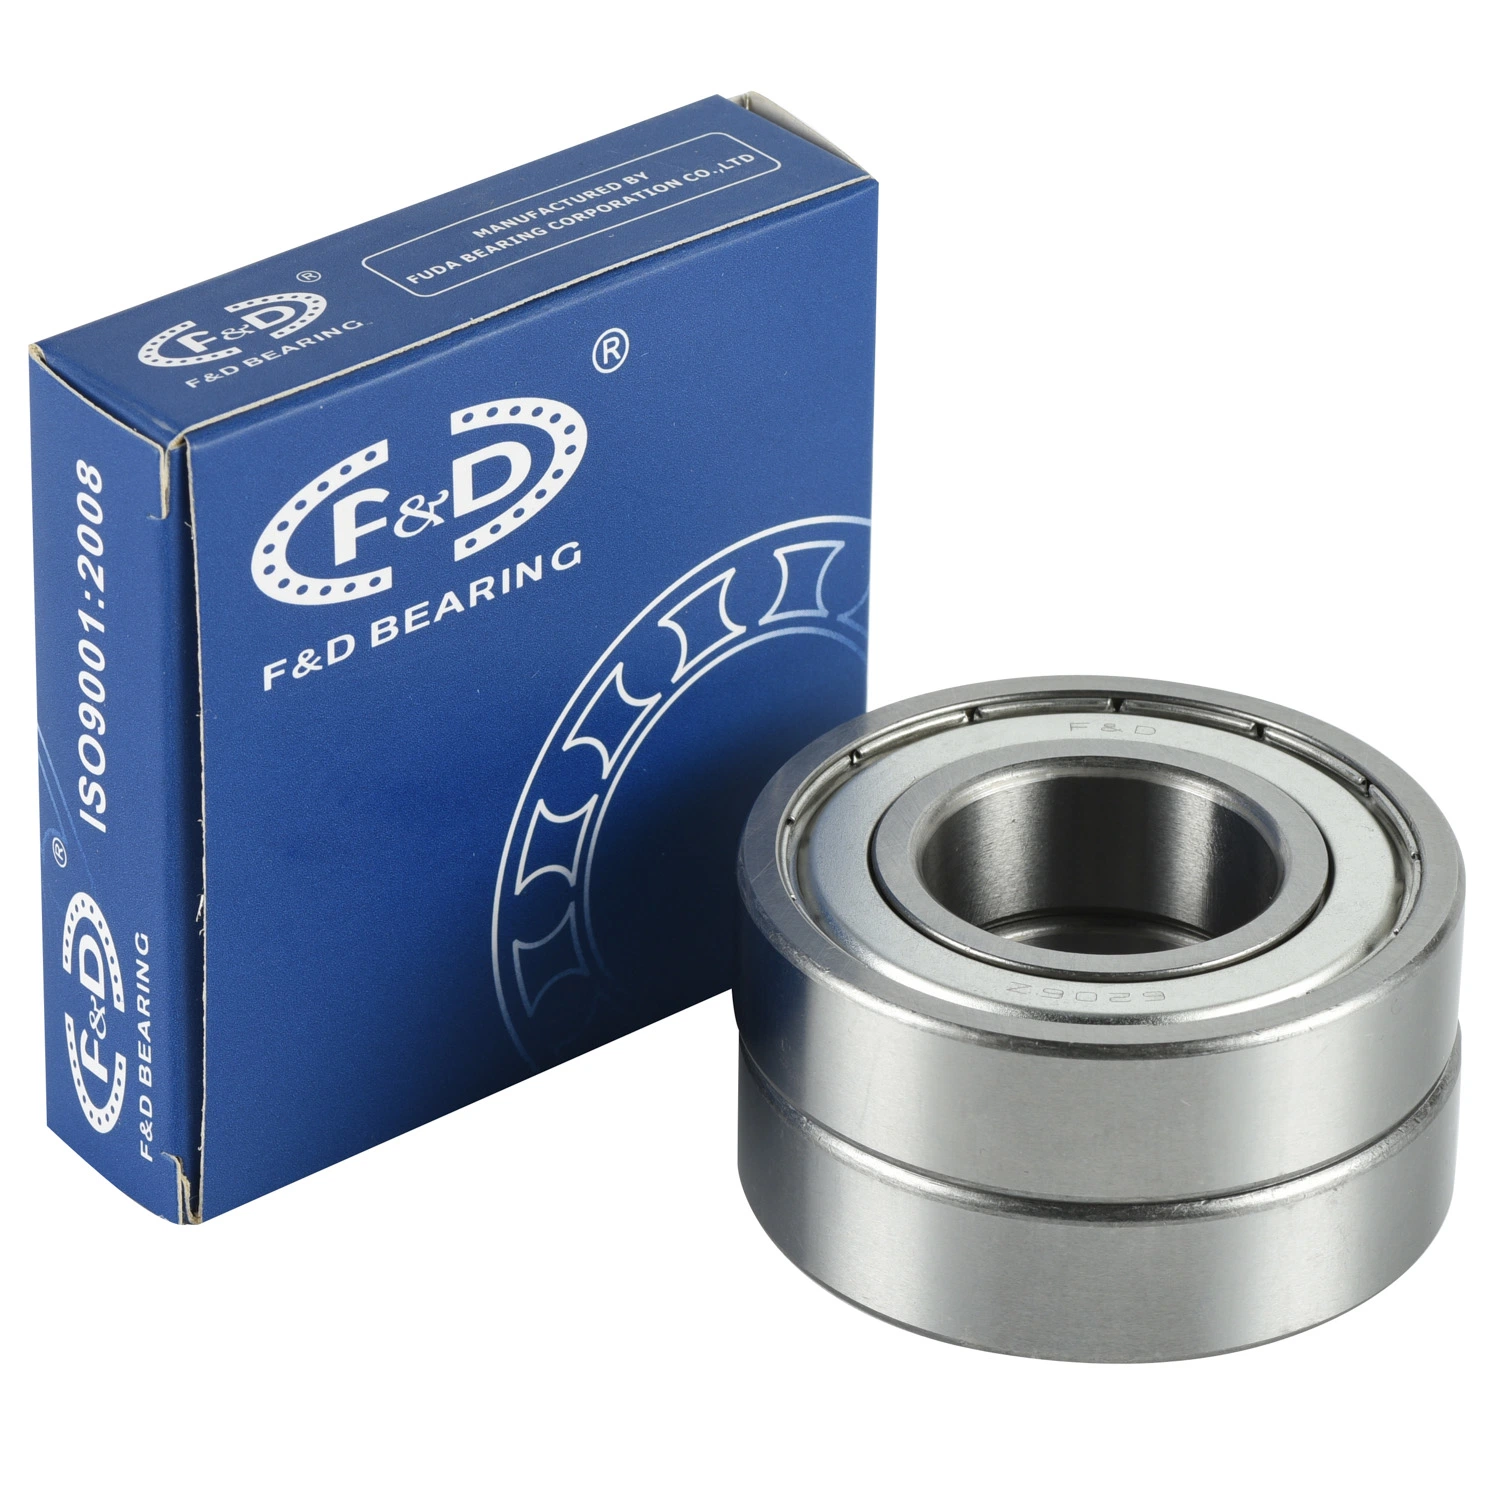 F&D Bearing 6202-ZZ 6201-Z auto parts spare parts engine parts motorcycle parts auto bearing roller bearing wheel bearings